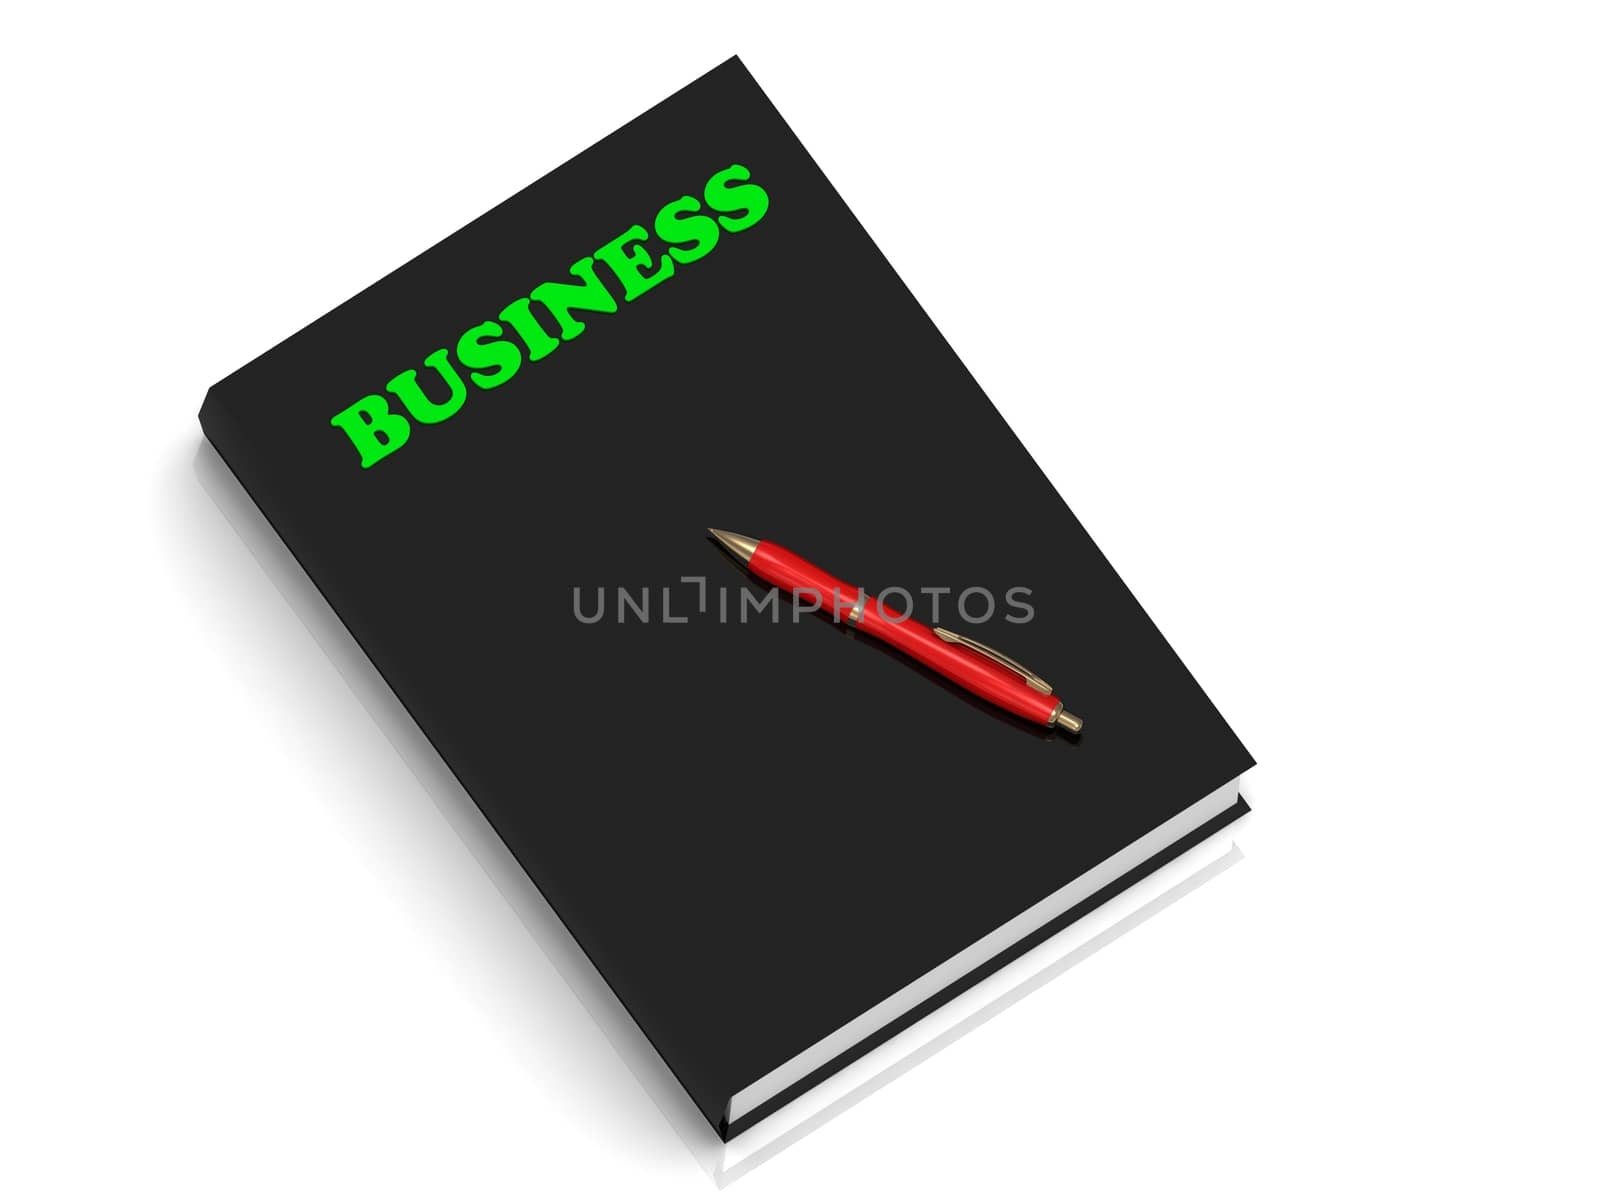 BUSINESS- inscription of green letters on black book on white background